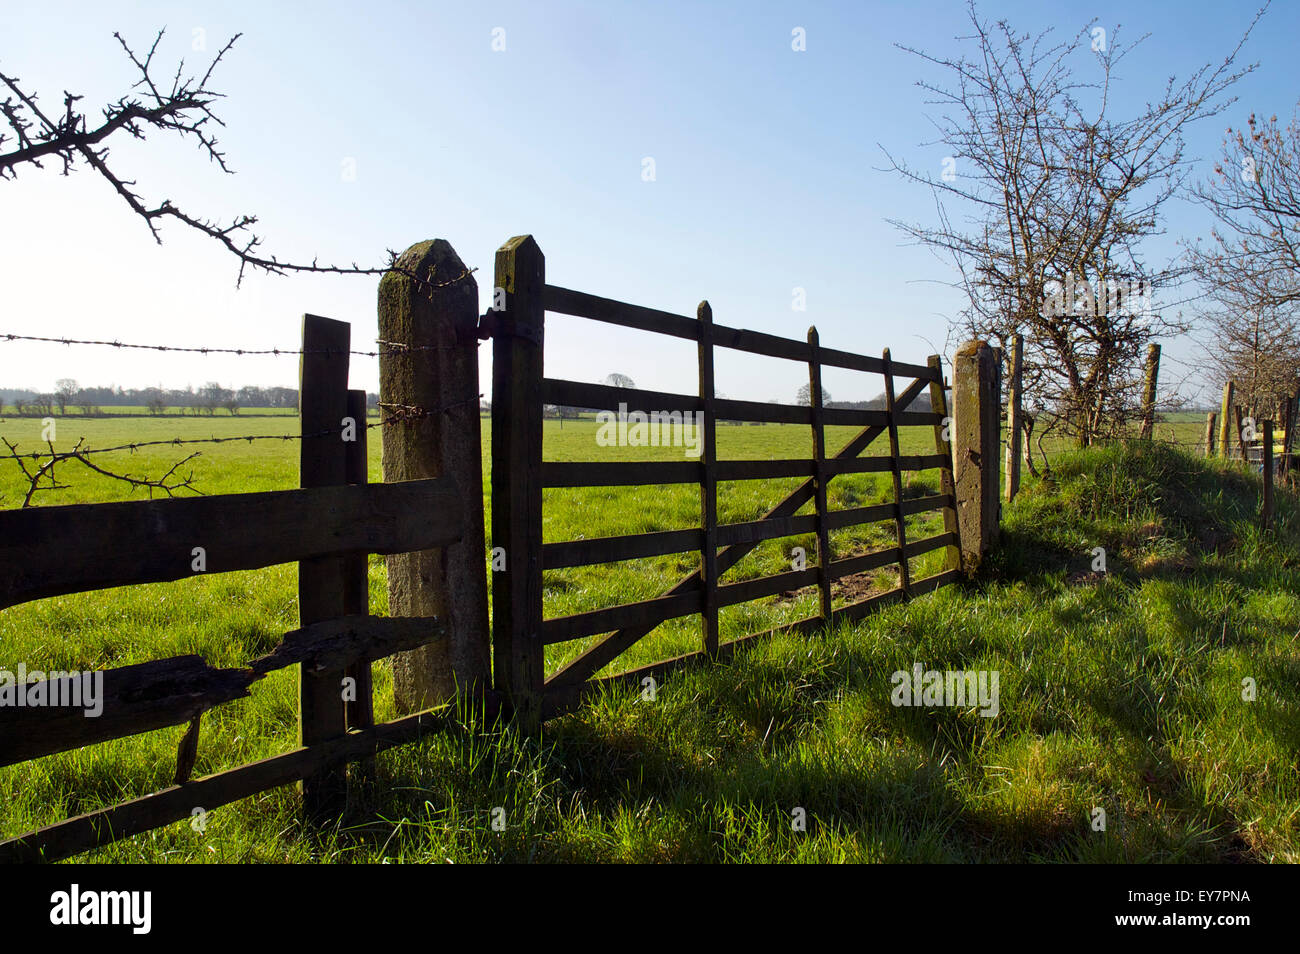 An old wooden gate in a green field under a clear blue sky. Stock Photo